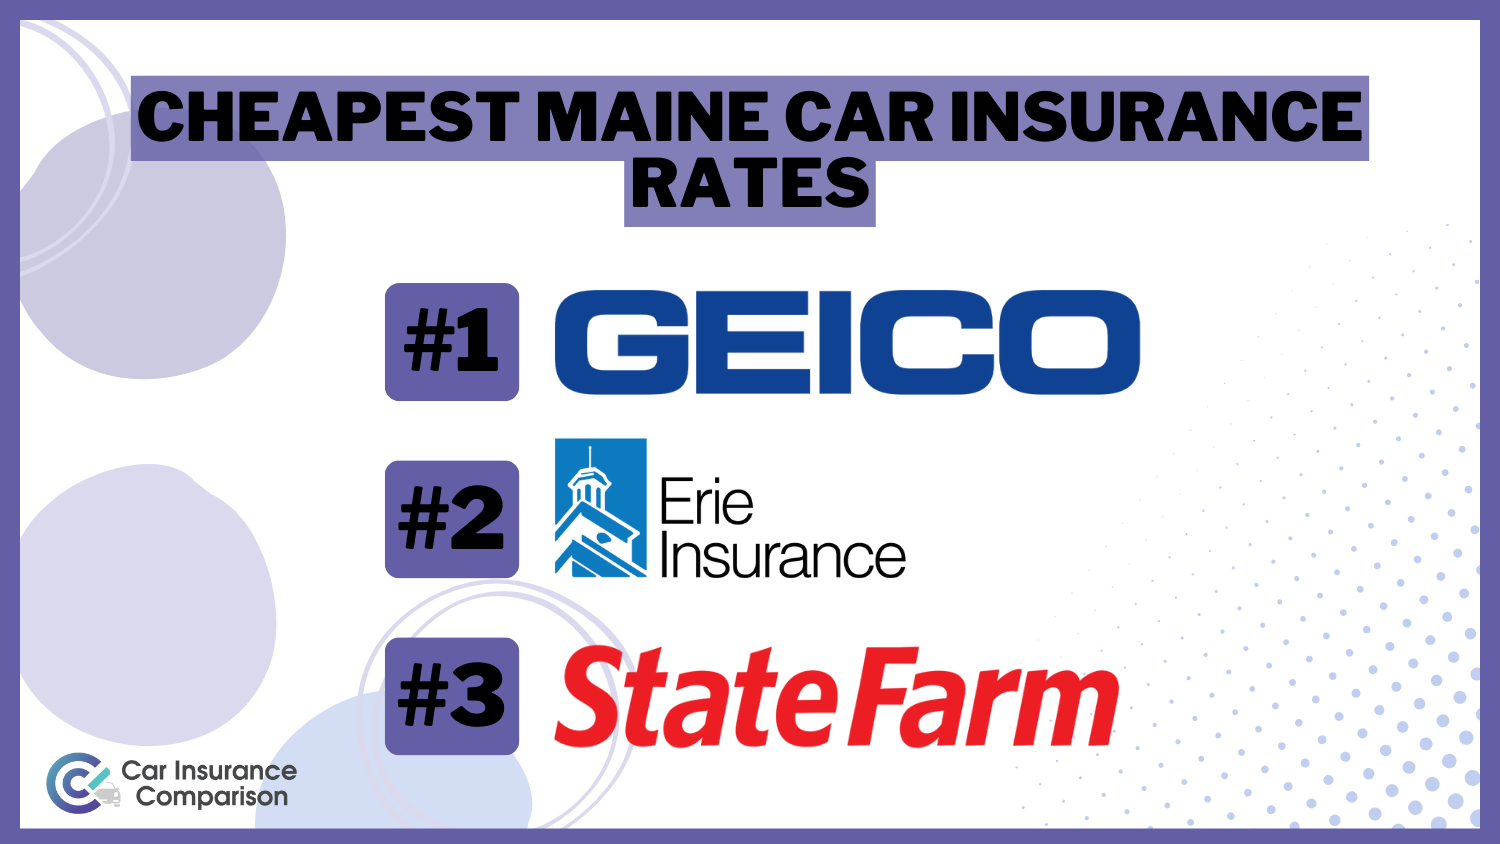 Cheapest Maine Car Insurance Rates: Geico, Erie, and State Farm.